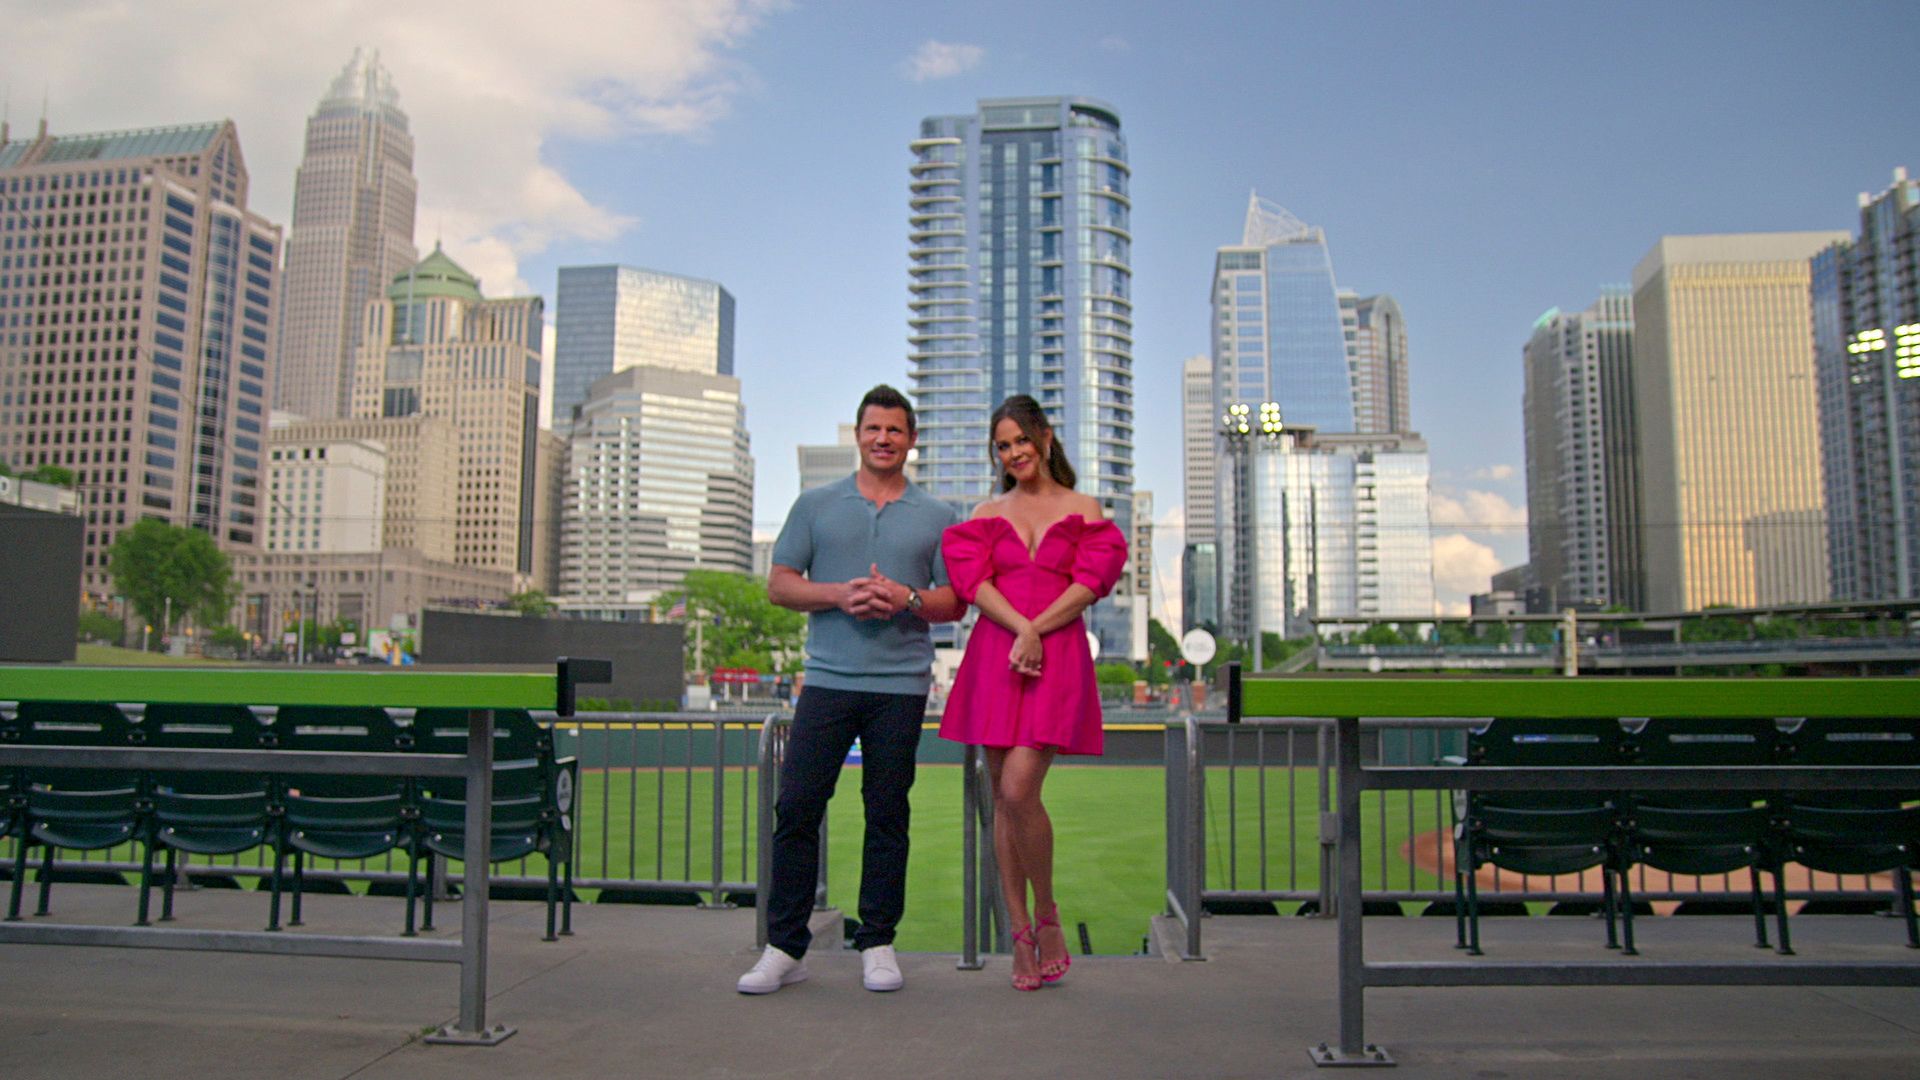 Nick and Vanessa Lachey host "Love Is Blind" a popular reality dating show on Netflix that features local singles and businesses.